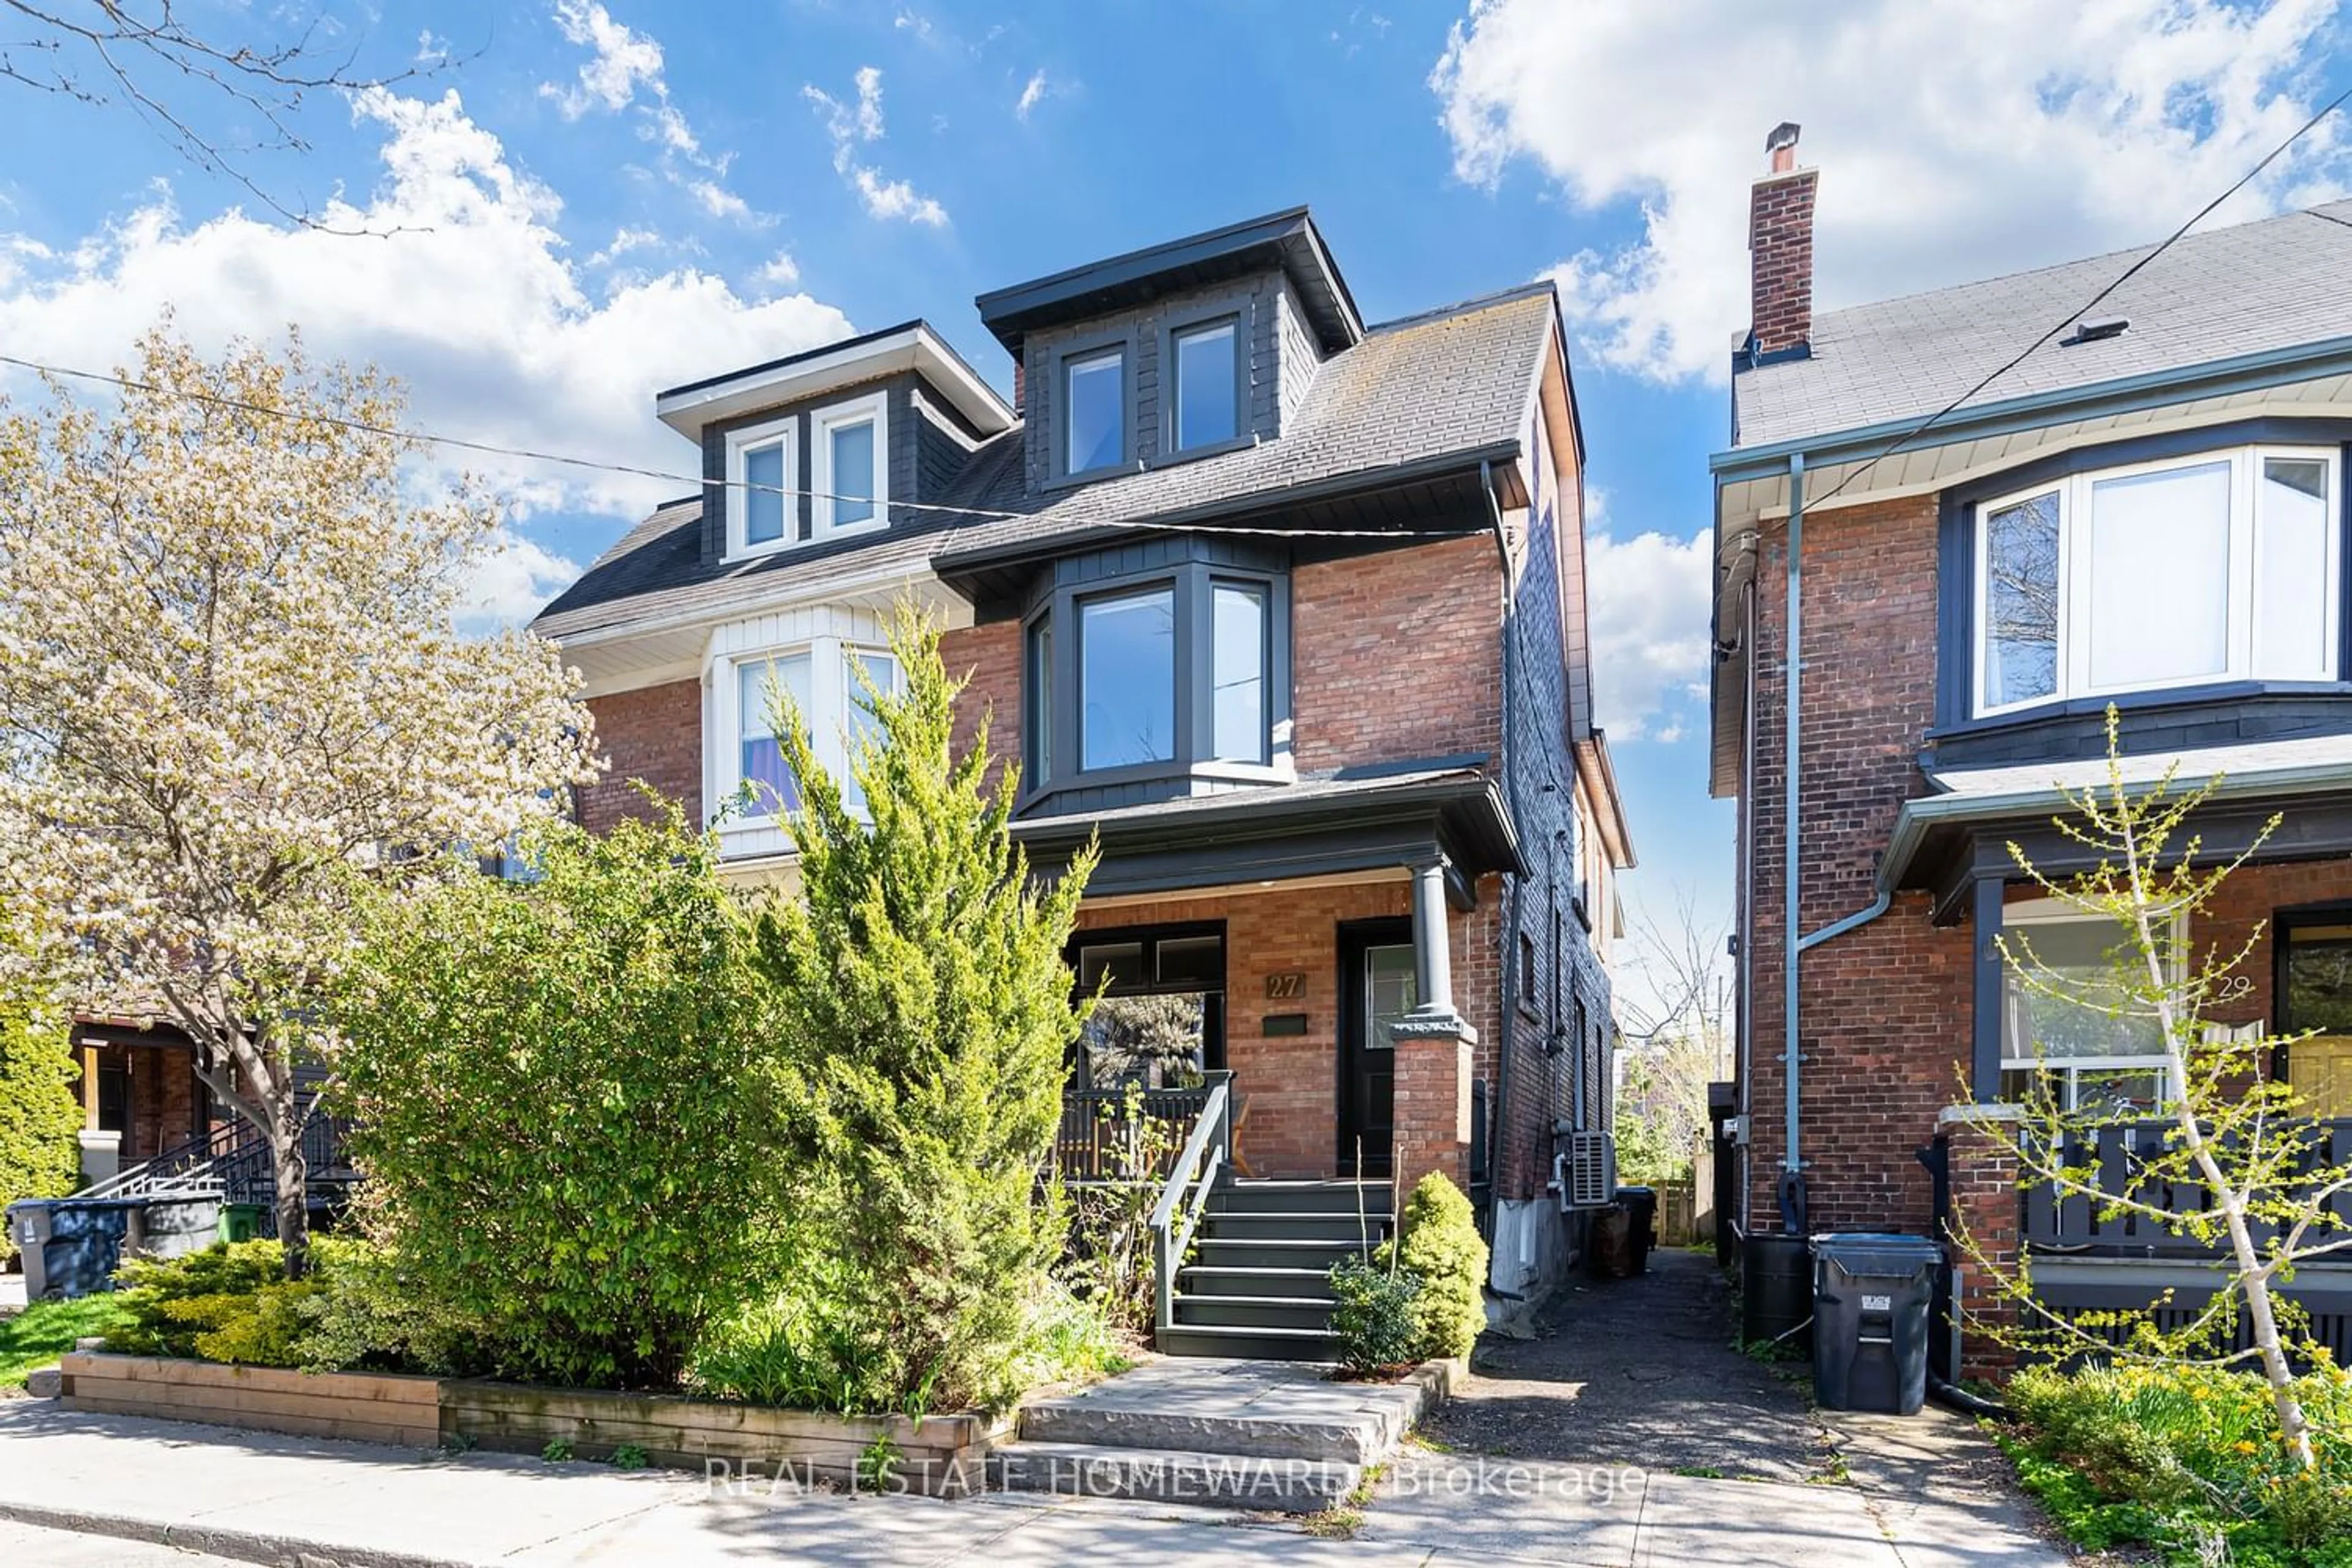 Home with brick exterior material for 27 Saunders Ave, Toronto Ontario M6R 1B9